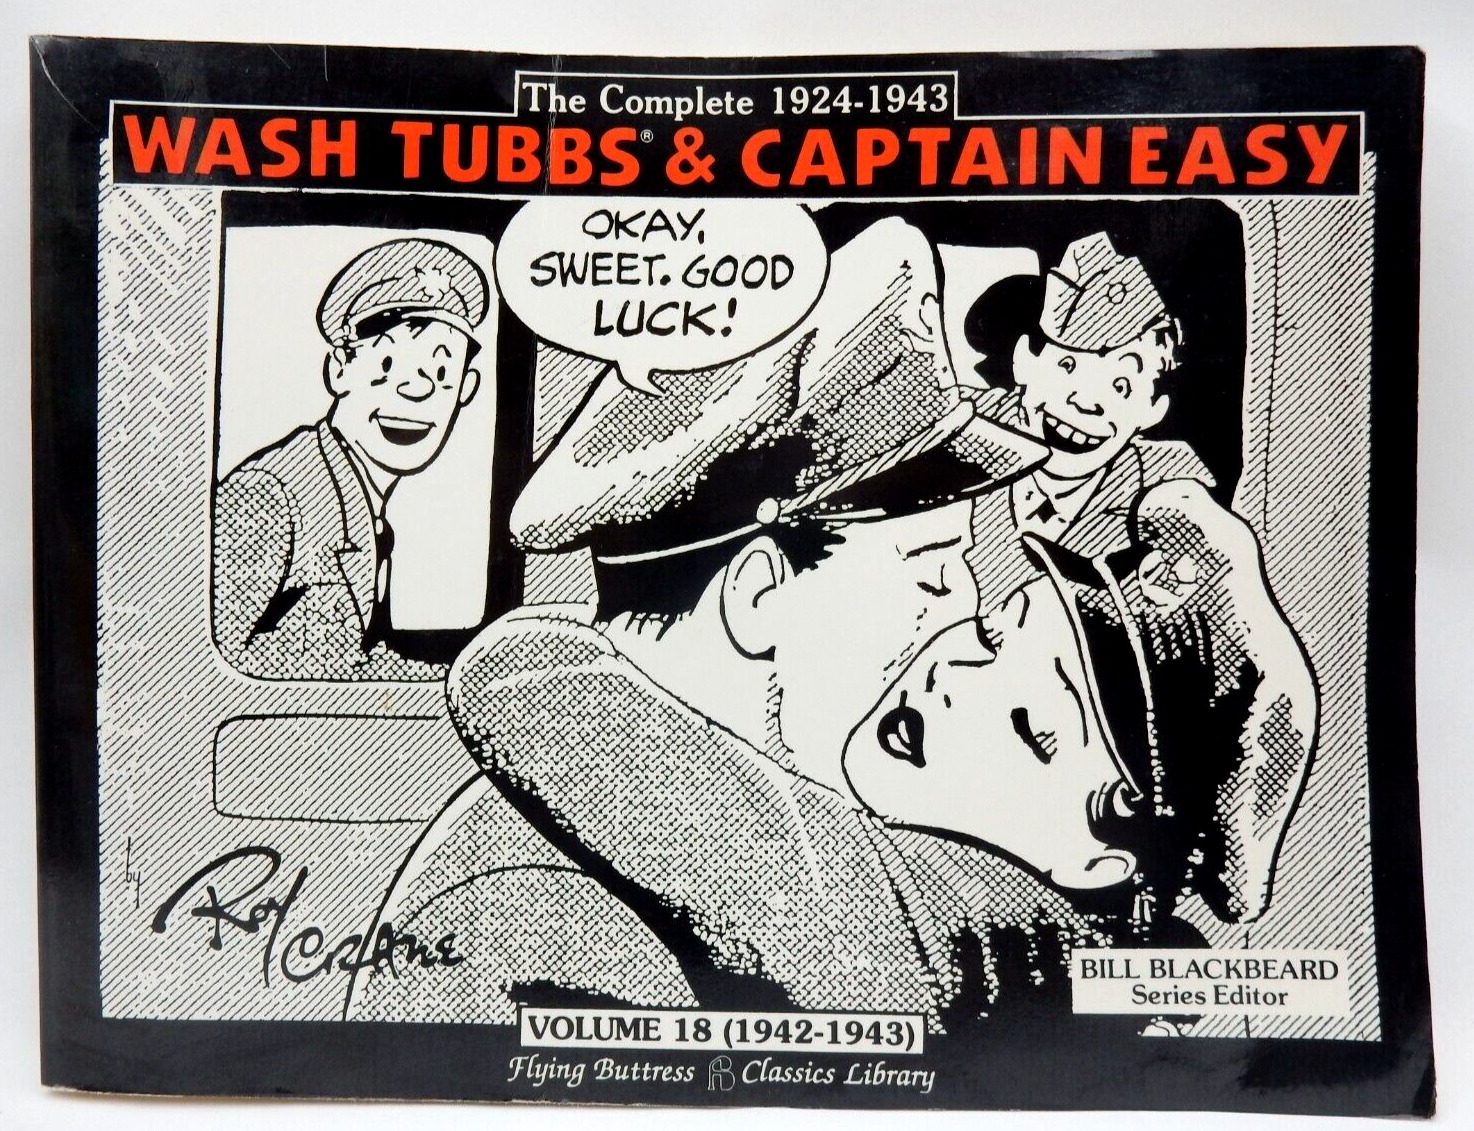 THE COMPLETE WASH TUBBS & CAPTAIN EASY VOLUME 18 (1941-1943) FLYING BUTTRESS